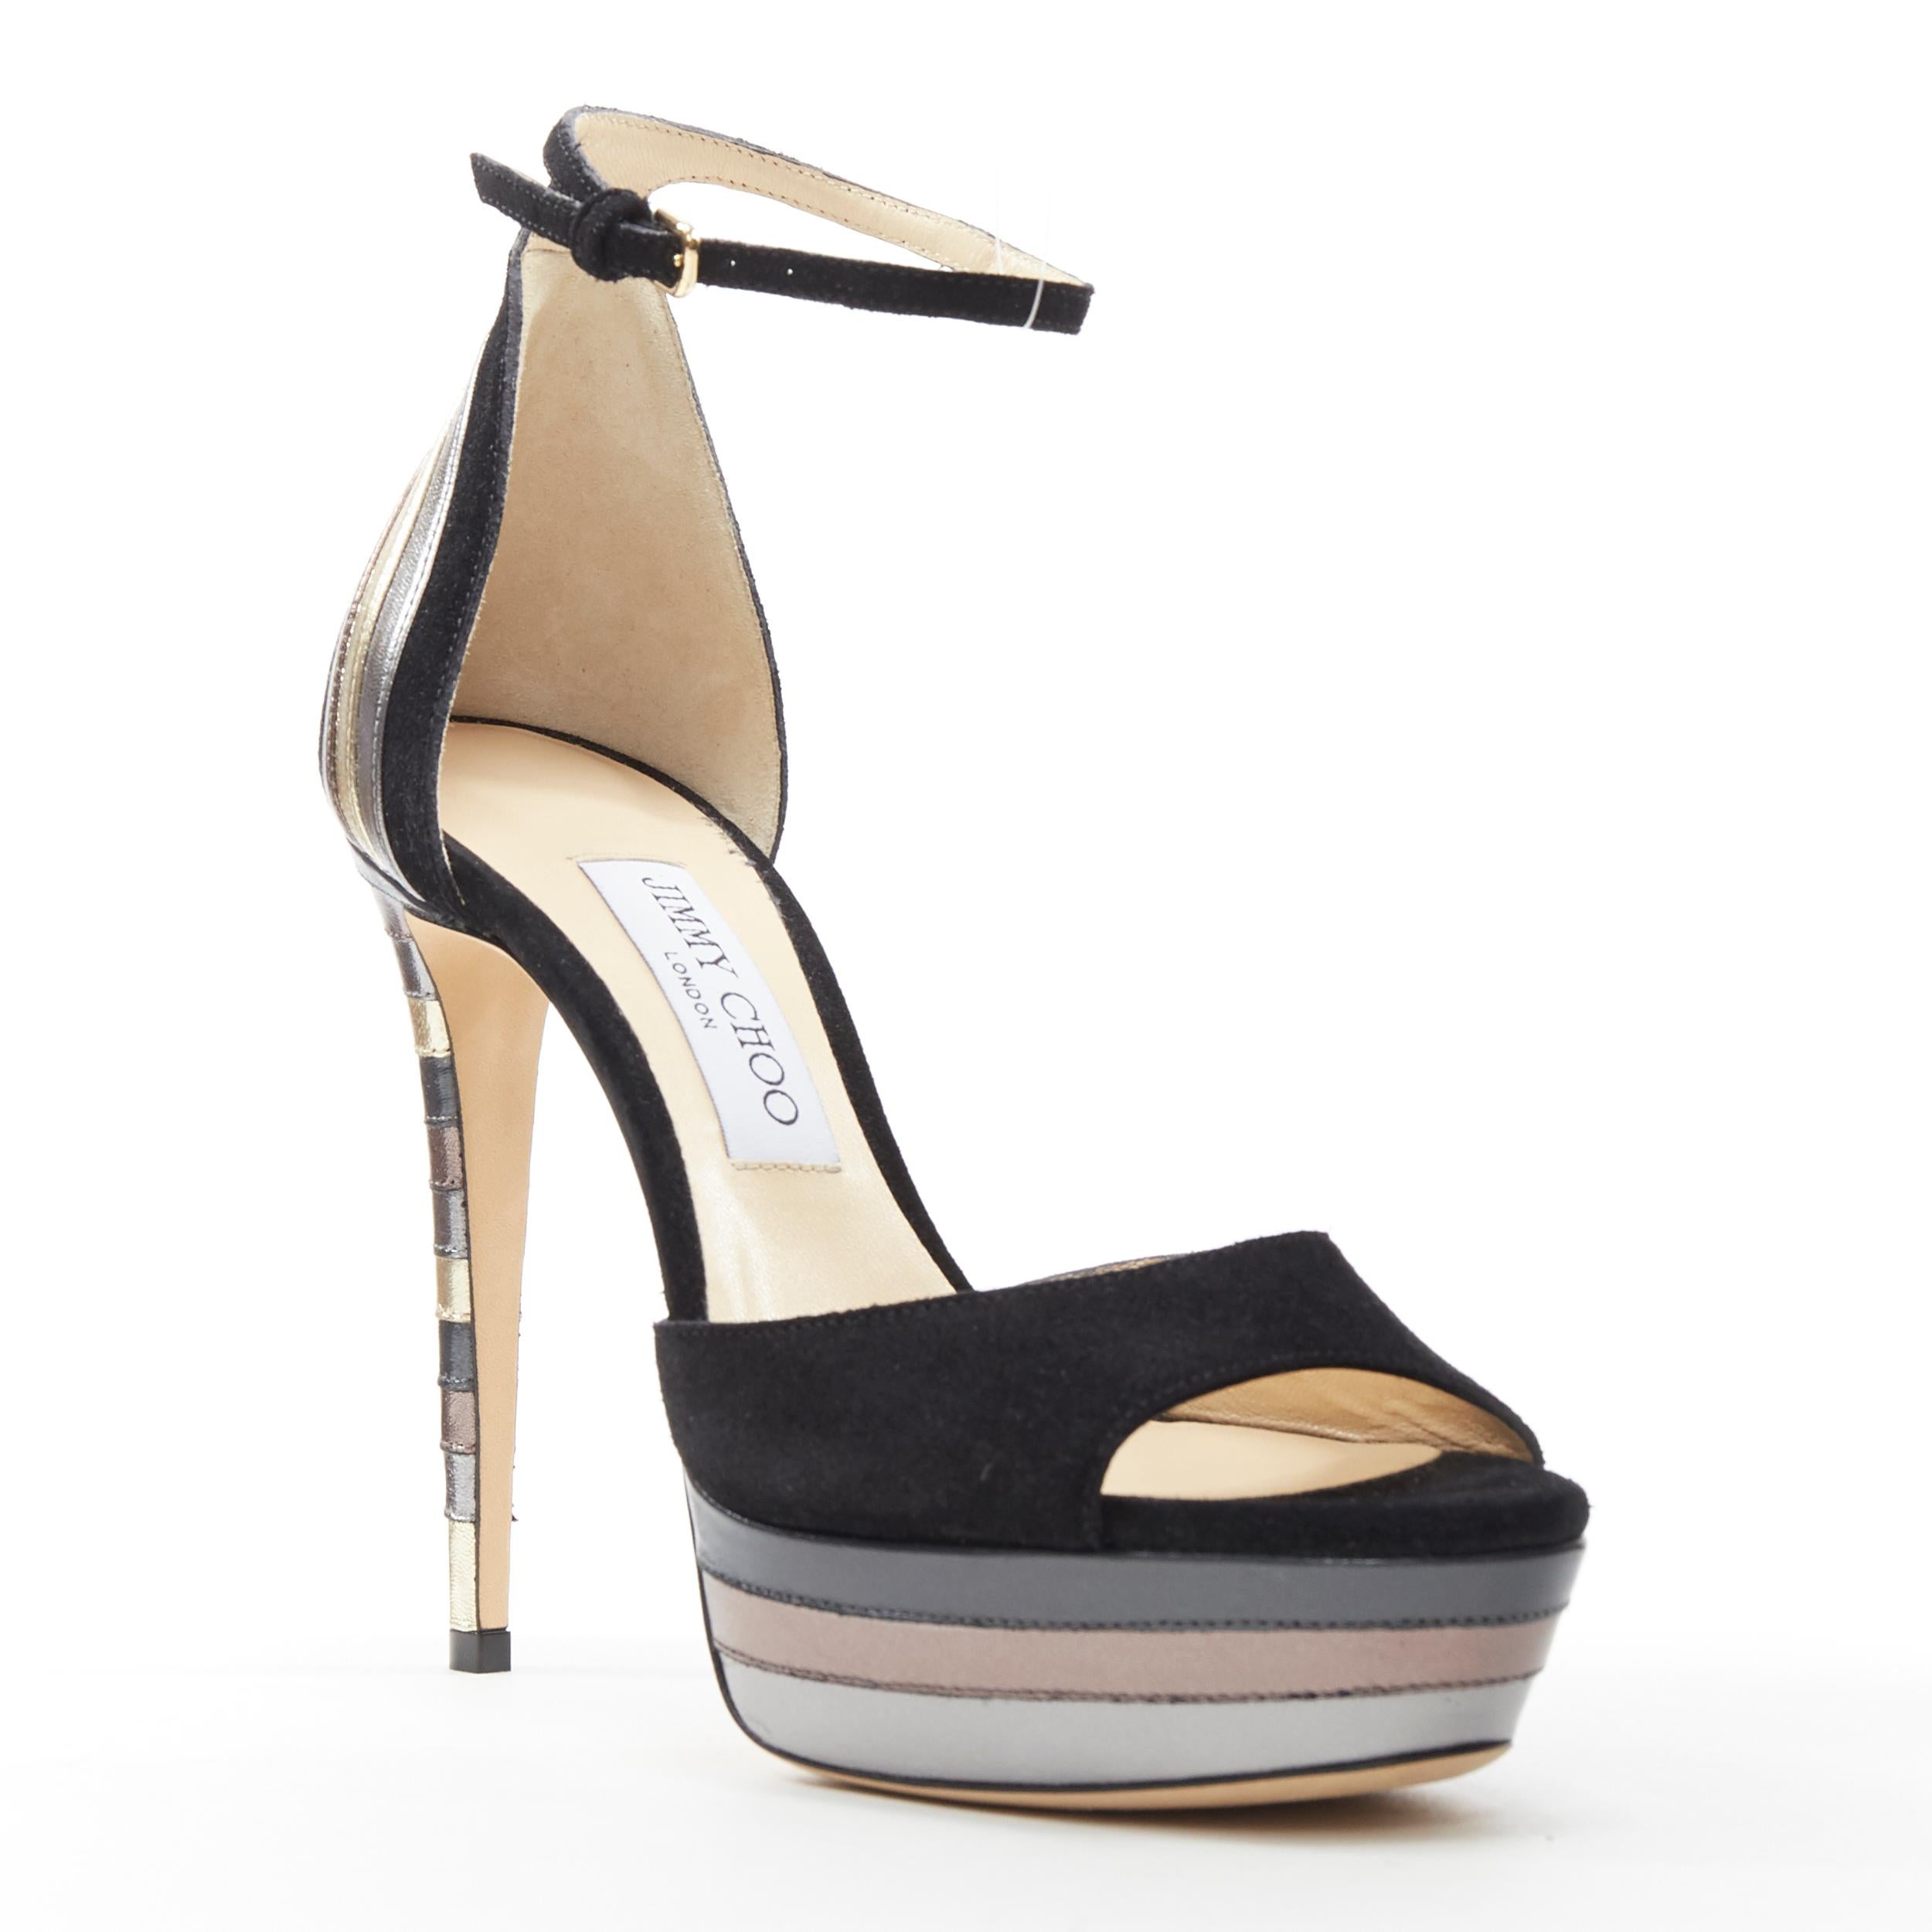 new JIMMY CHOO Max 120 black suede silver graphic layered platform sandals EU38
Brand: Jimmy Choo
Designer: Jimmy Choo
Model Name / Style: Max 120
Material: Suede
Color: Black
Pattern: Striped
Closure: Ankle strap
Extra Detail: Black suede leather